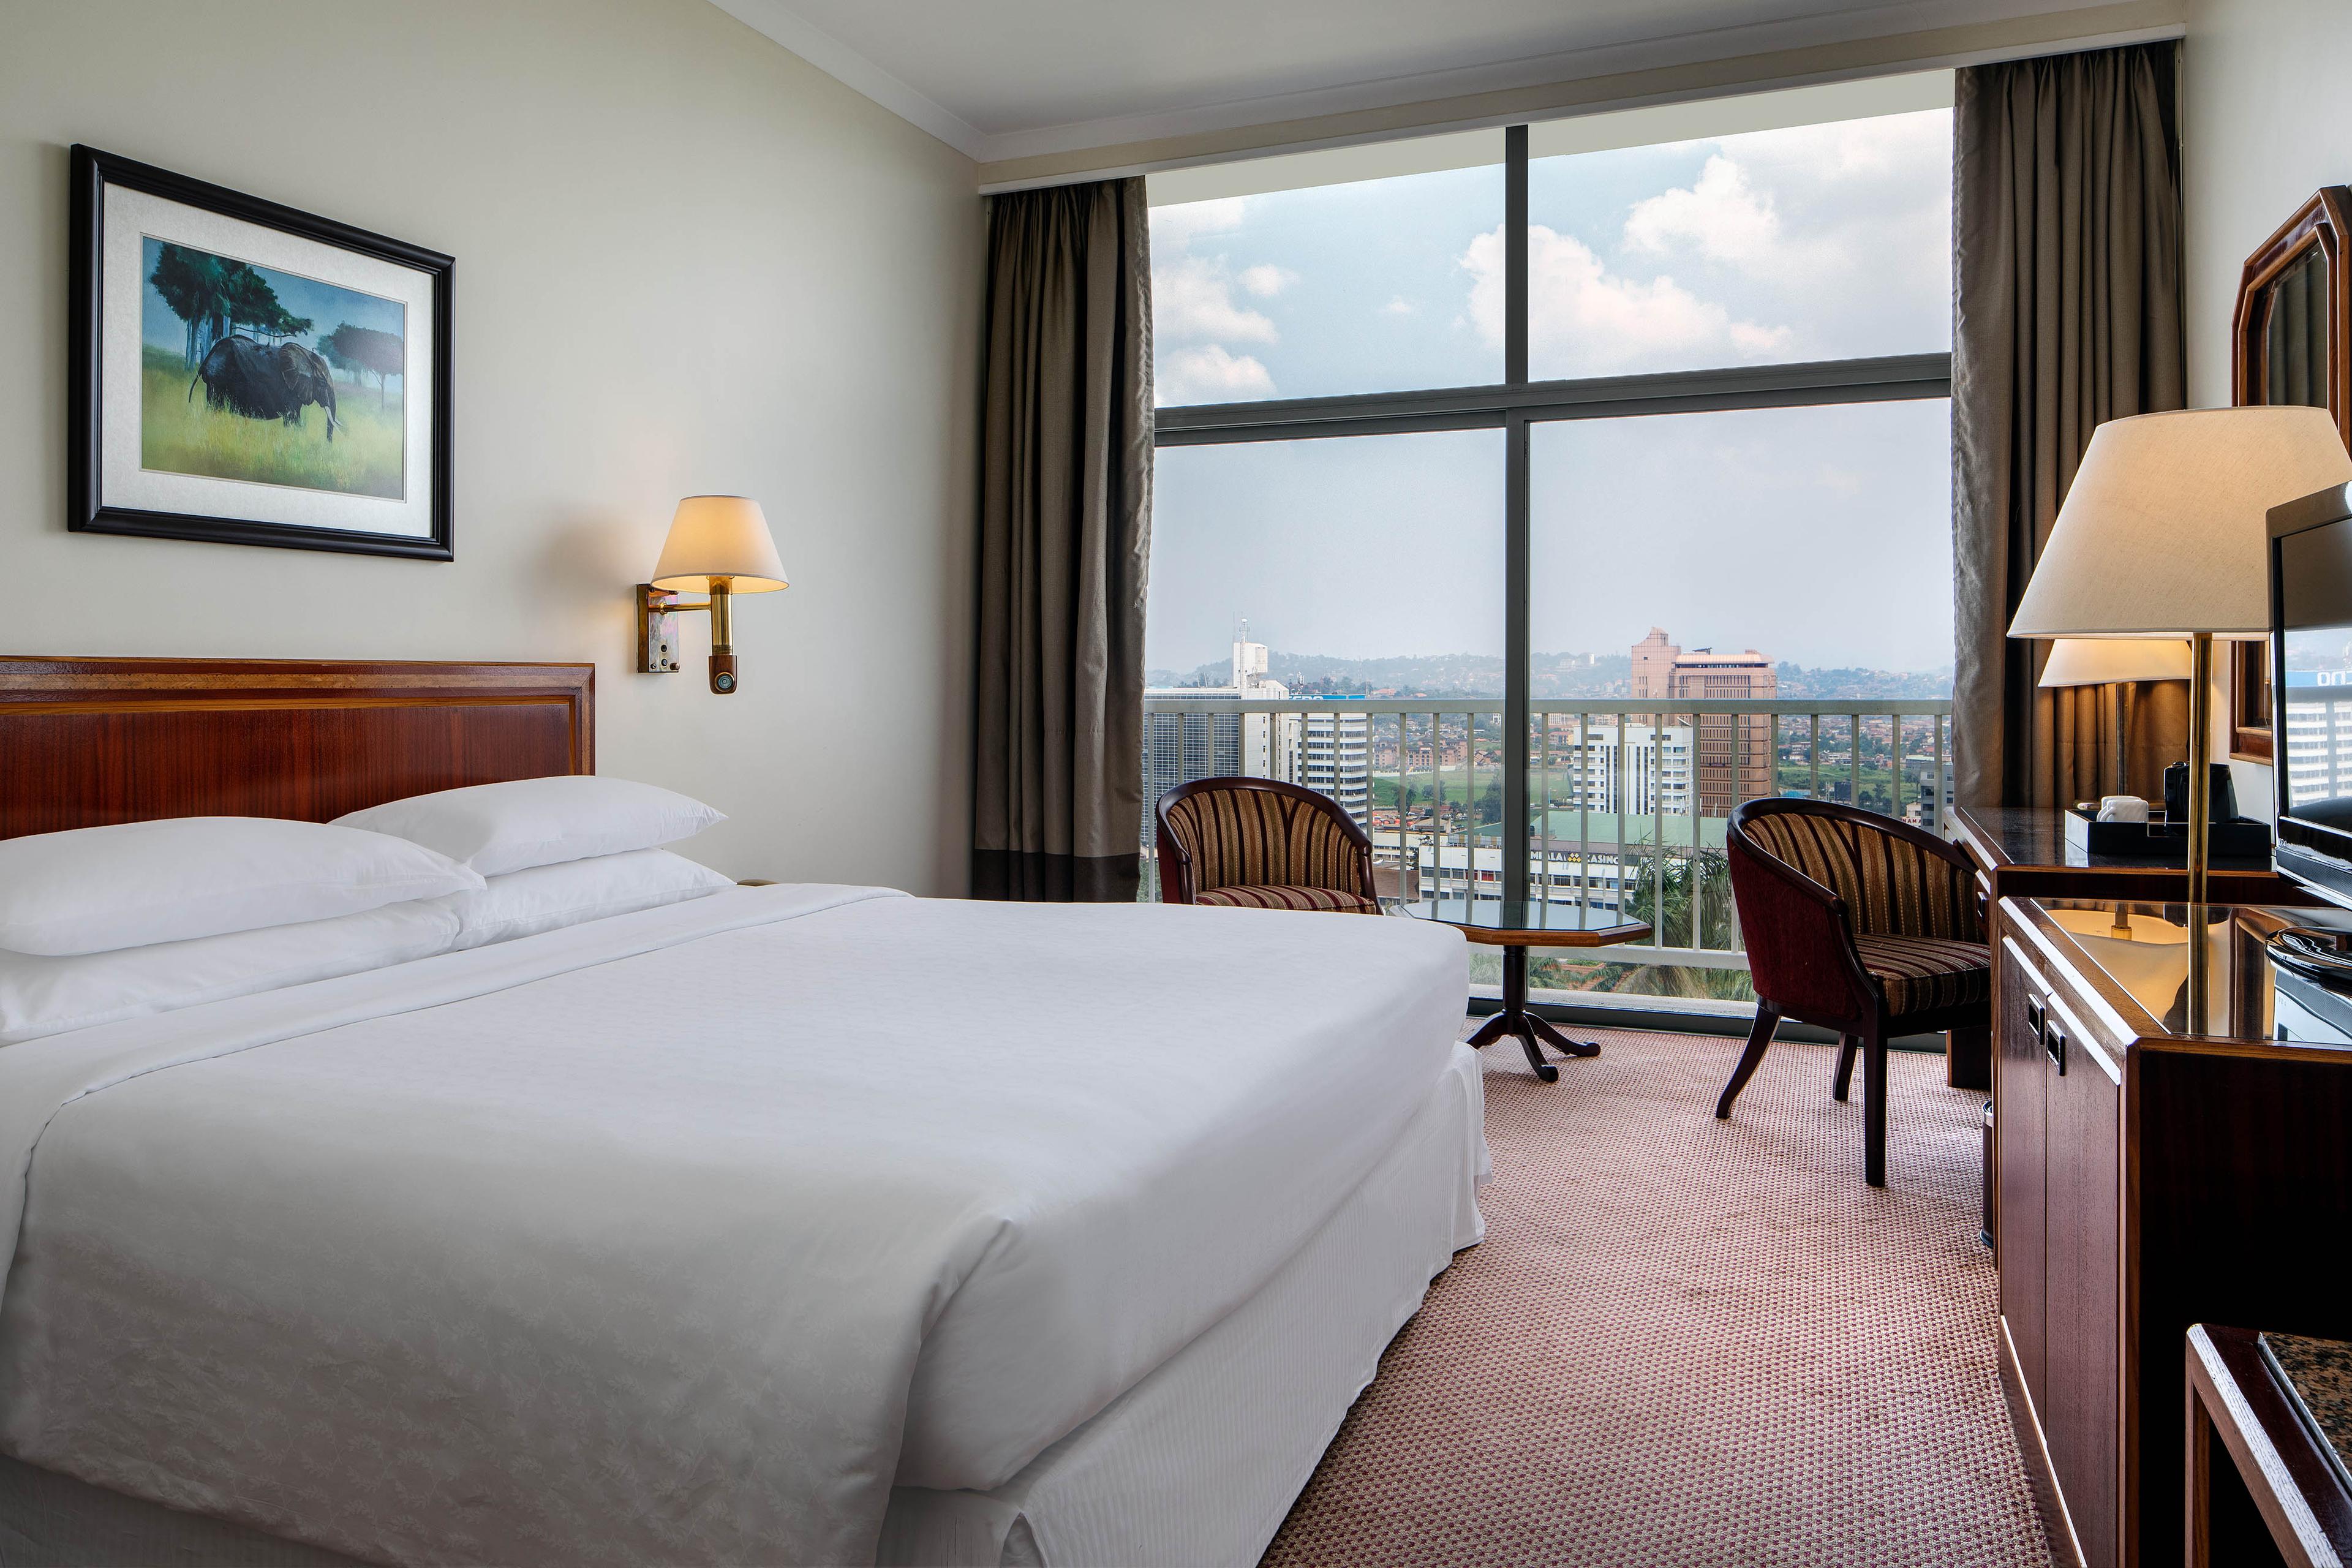 Our guest rooms are popular with business travelers and feature luxurious king-size beds.